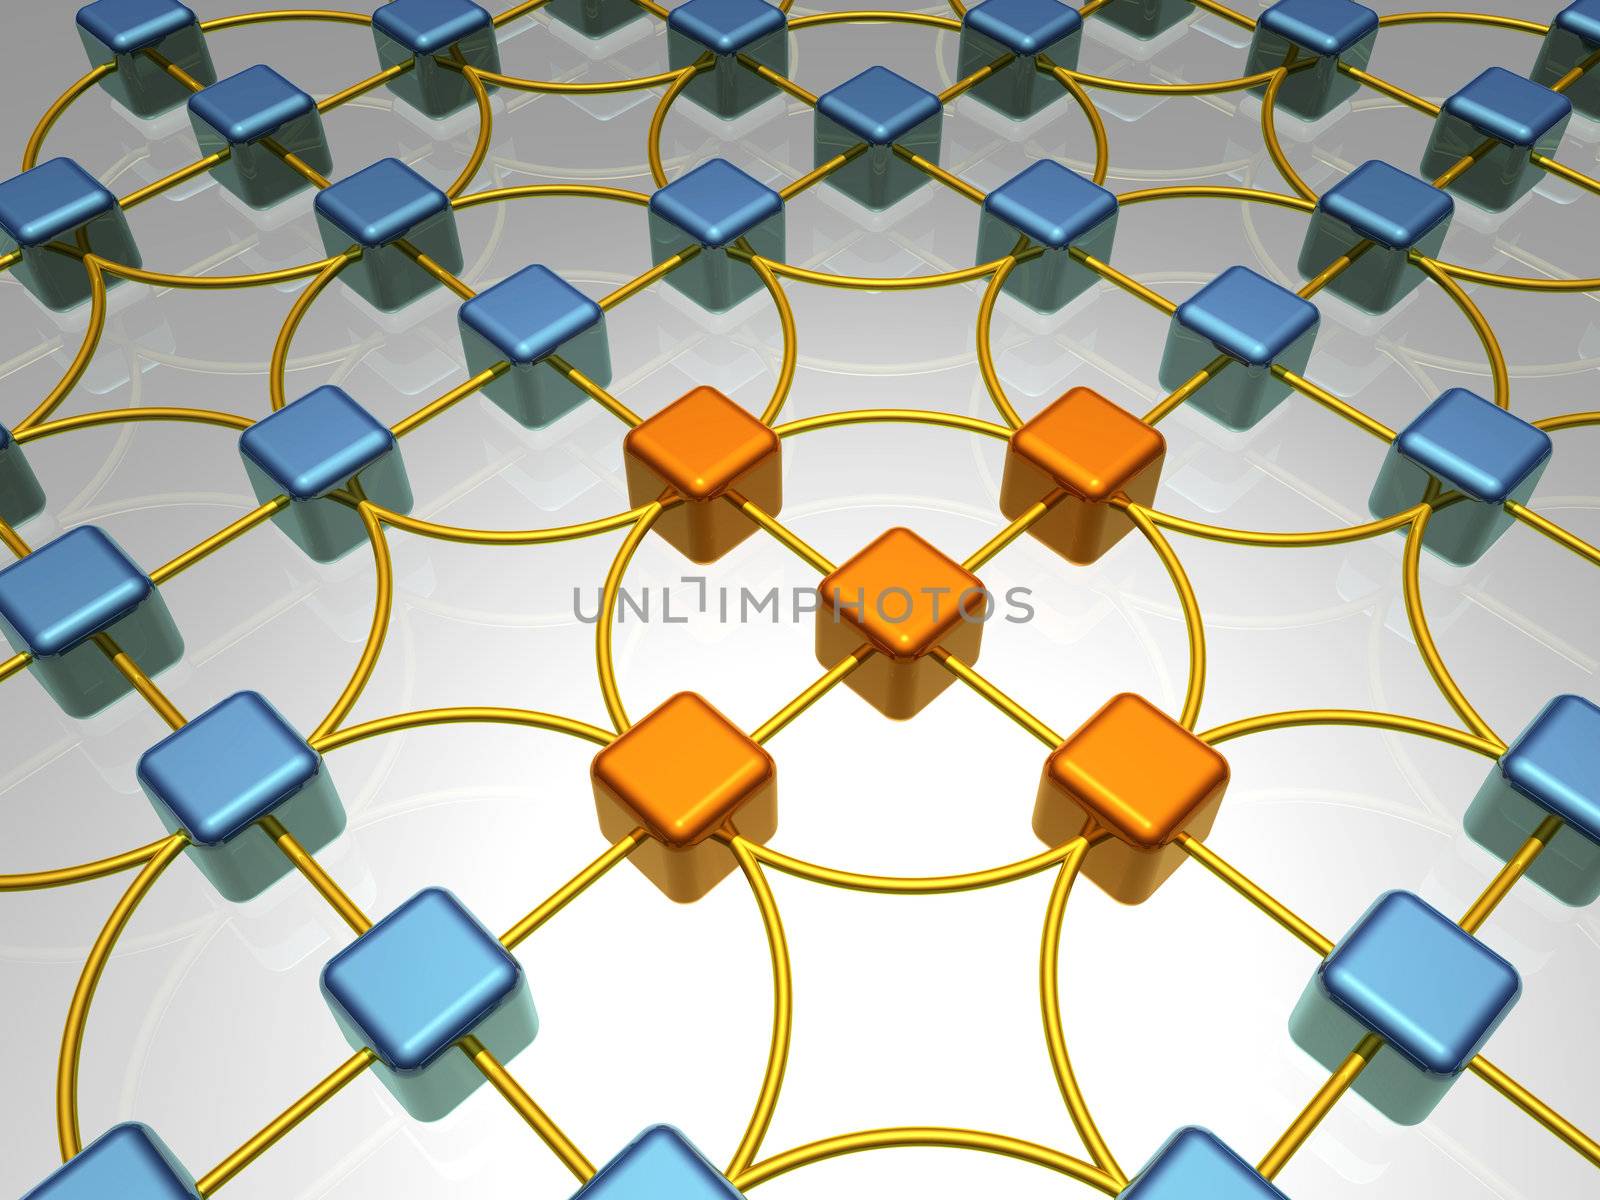 3D Illustration of Network (.raw file has alpha channel for network objects)